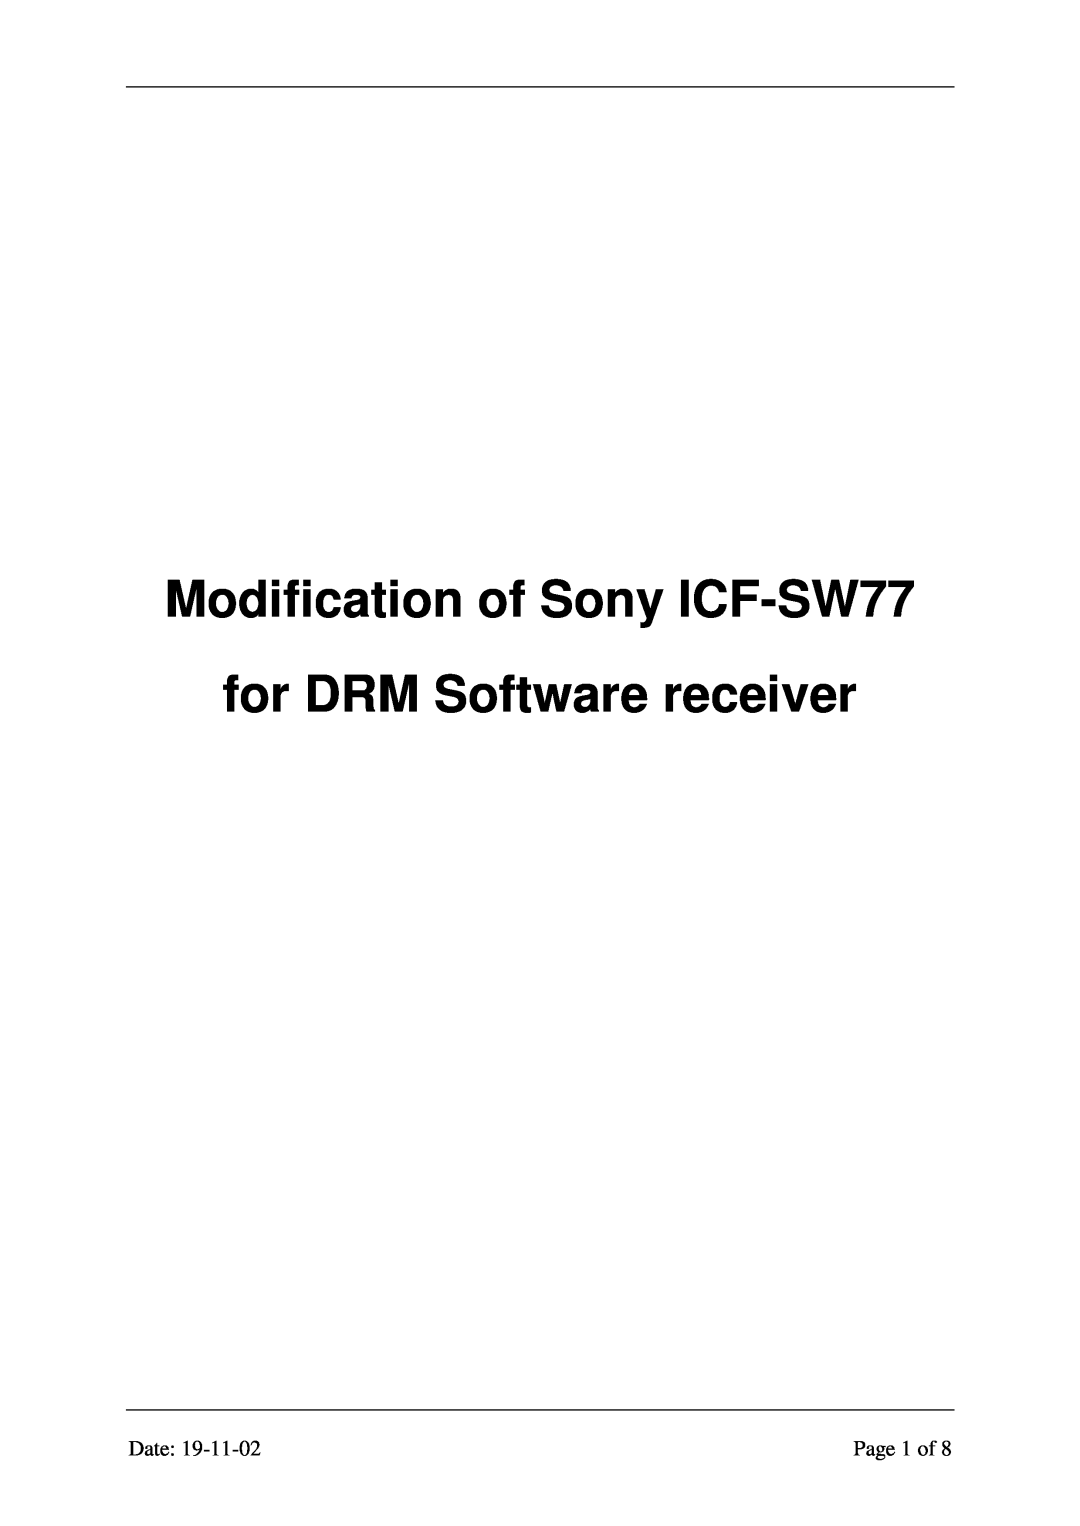 Sony manual Modification of Sony ICF-SW77, for DRM Software receiver, Date, Page 1 of 